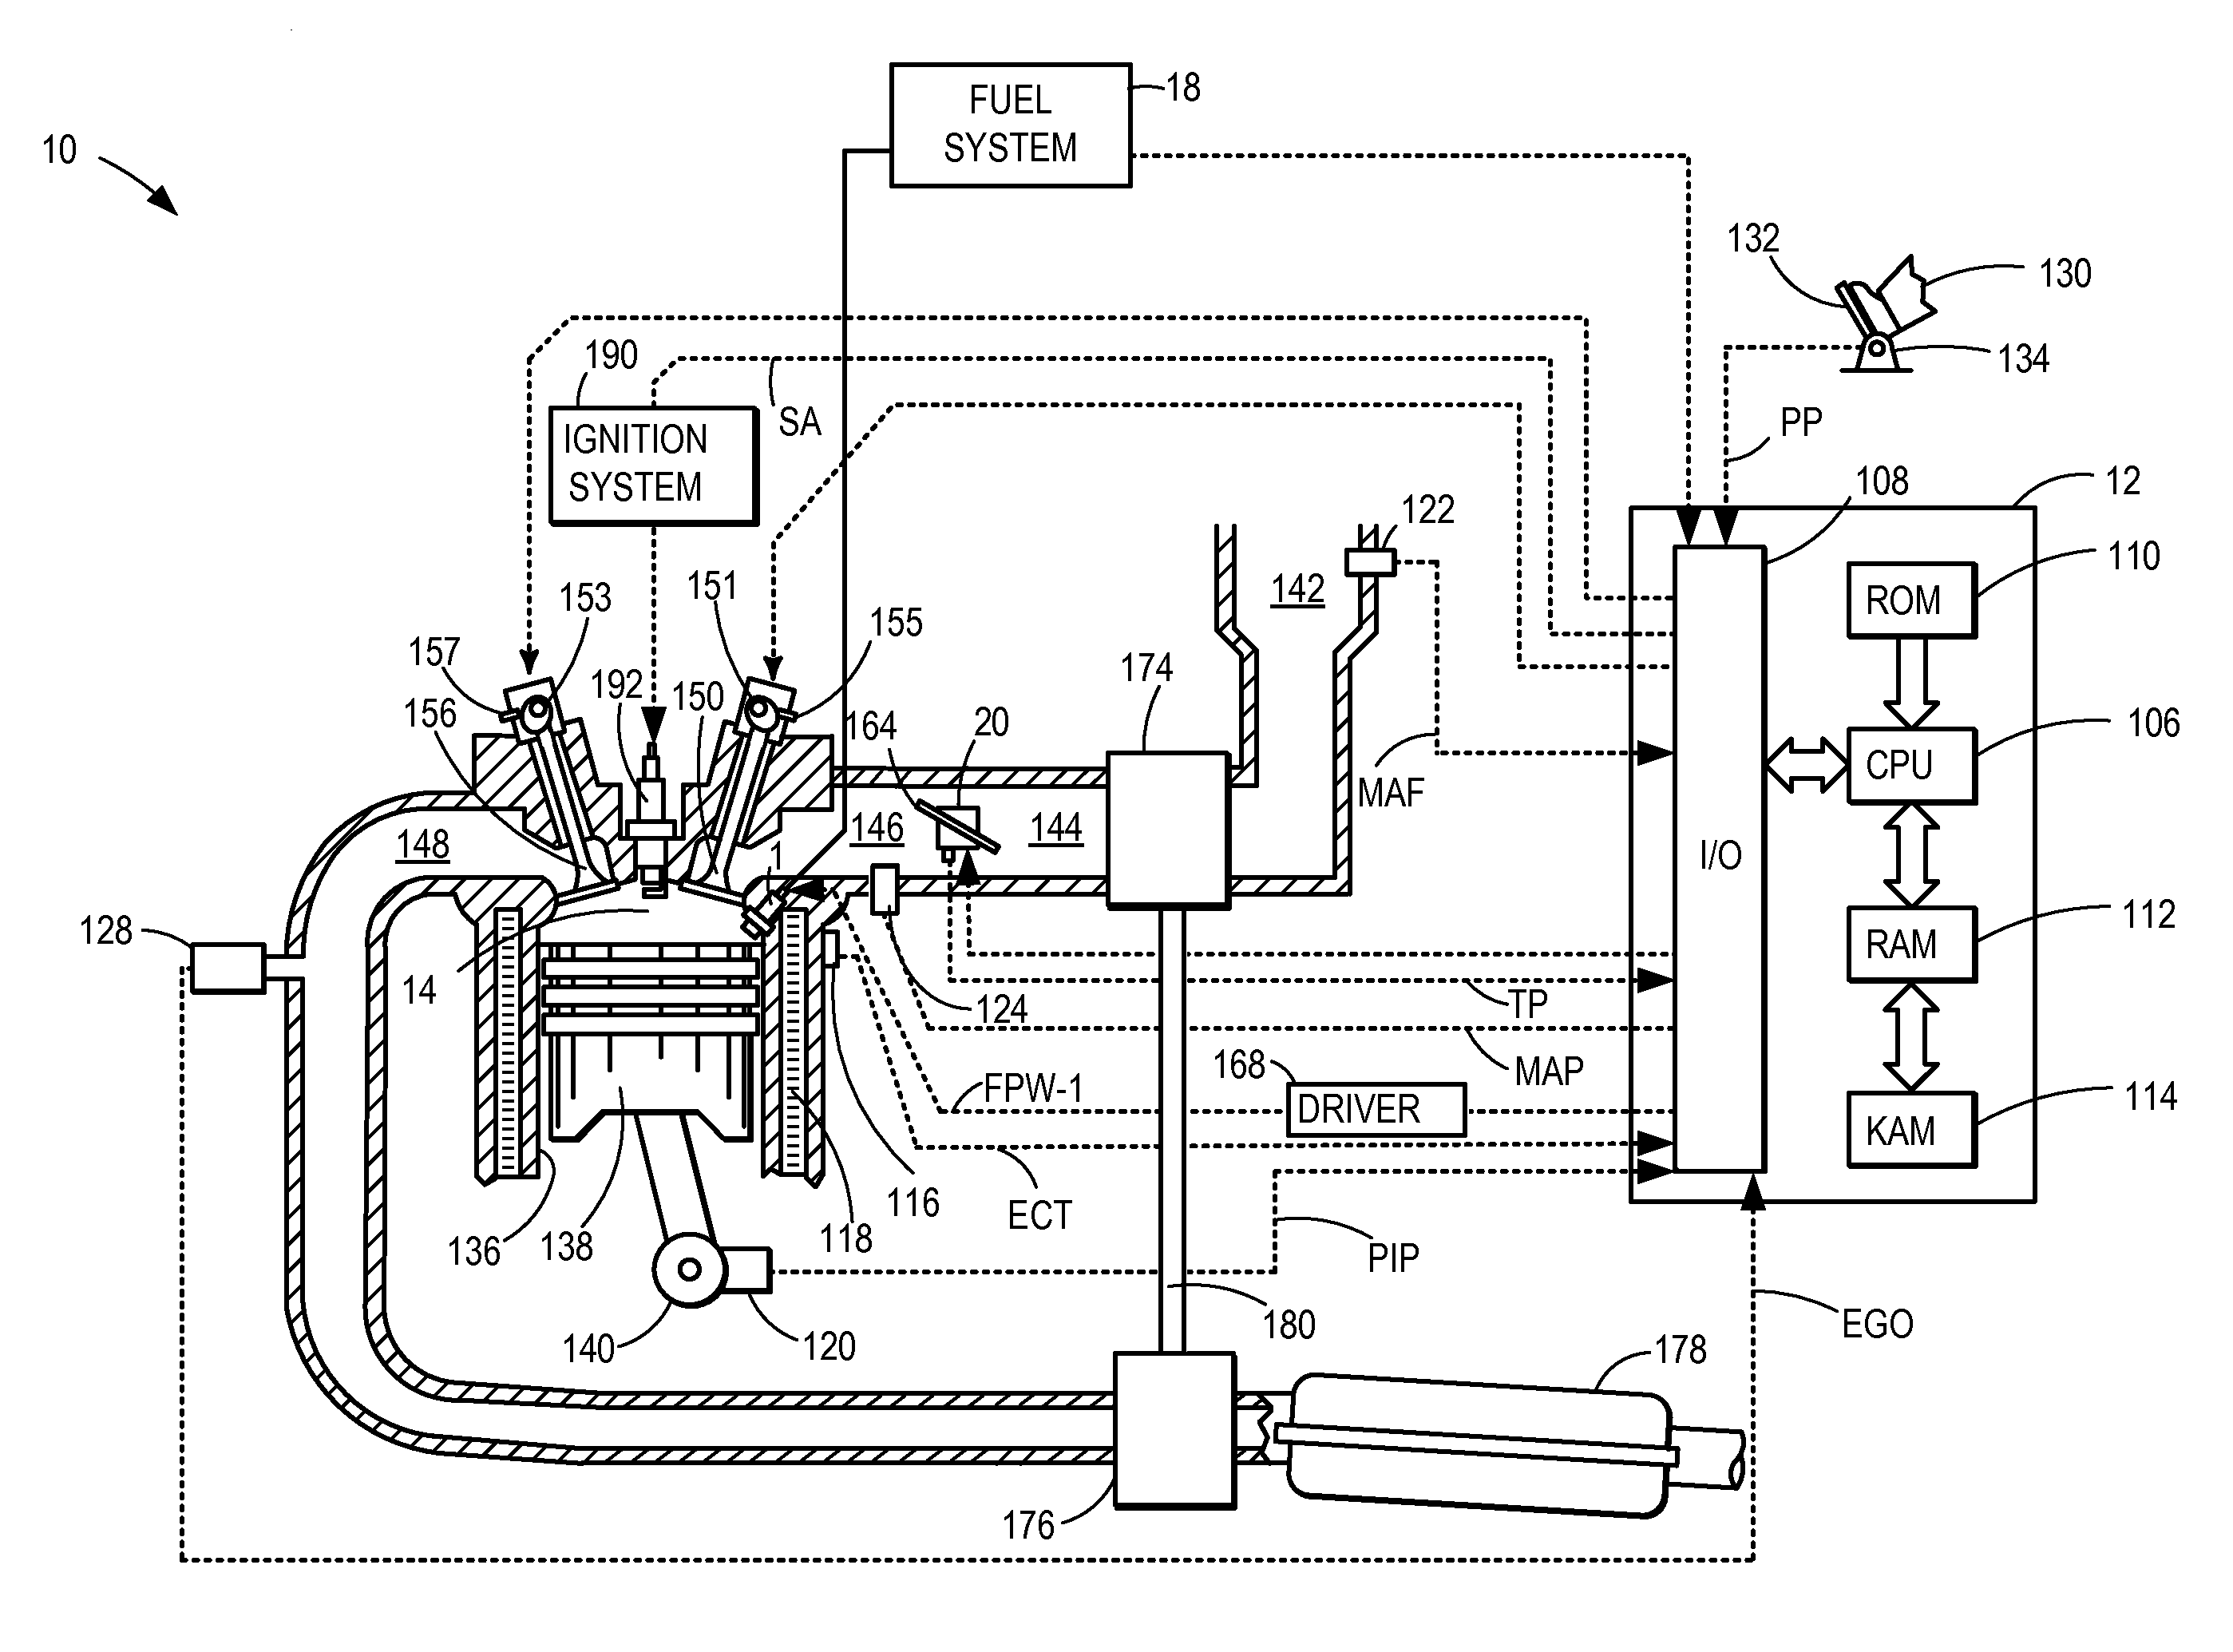 Applied-ignition internal combustion engine with catalytically coated injection device, and method for operating an internal combustion engine of said type